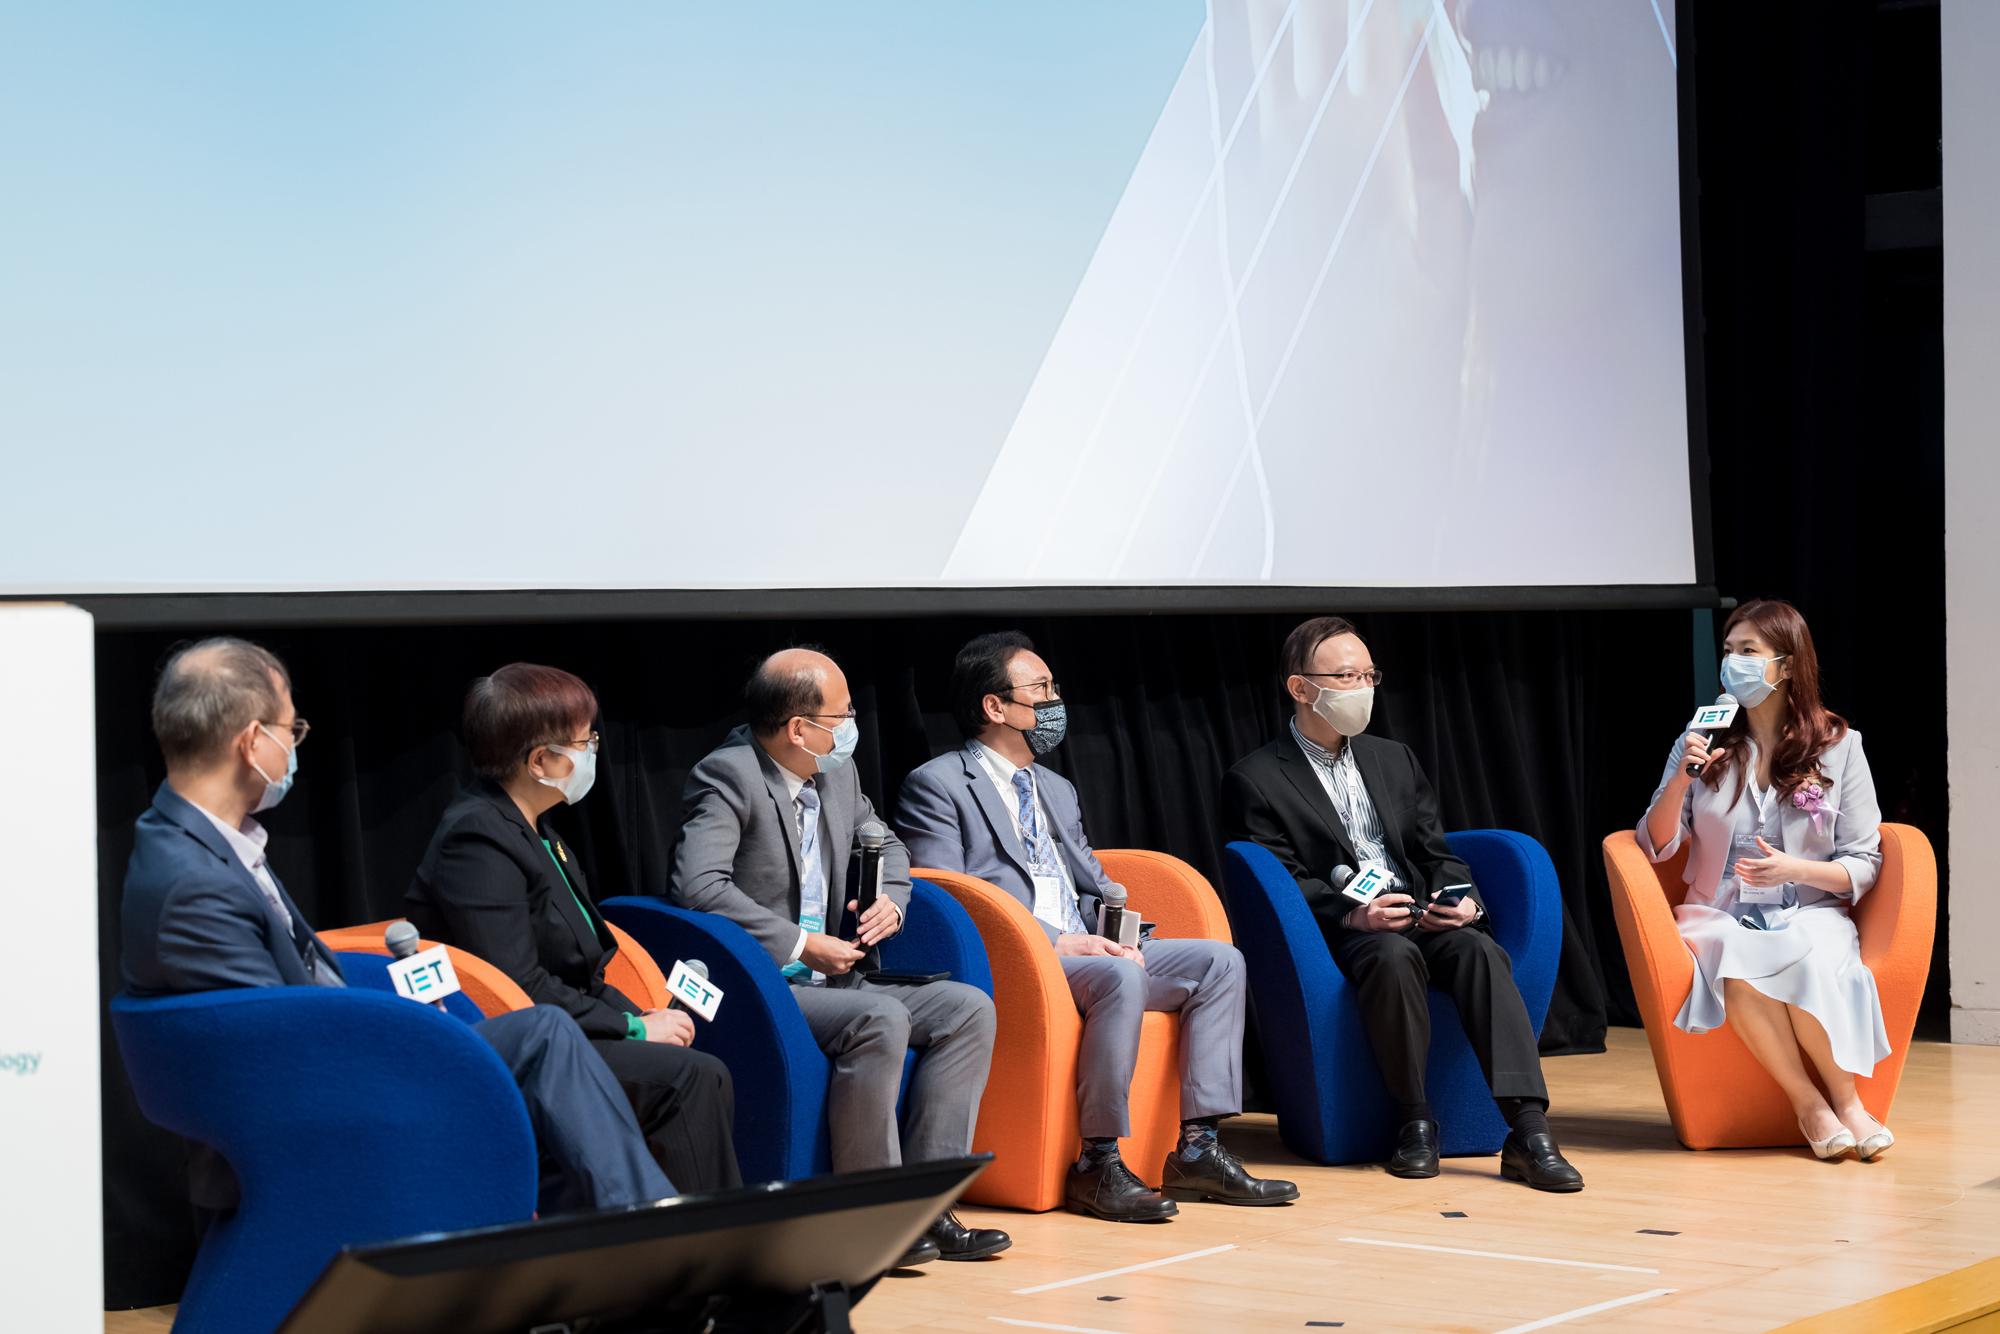 Mr. Victor Lam, Government Chief Information Officer (2nd right), joined the panel discussion at the "IET Engineering Conference – Our World in 2030".